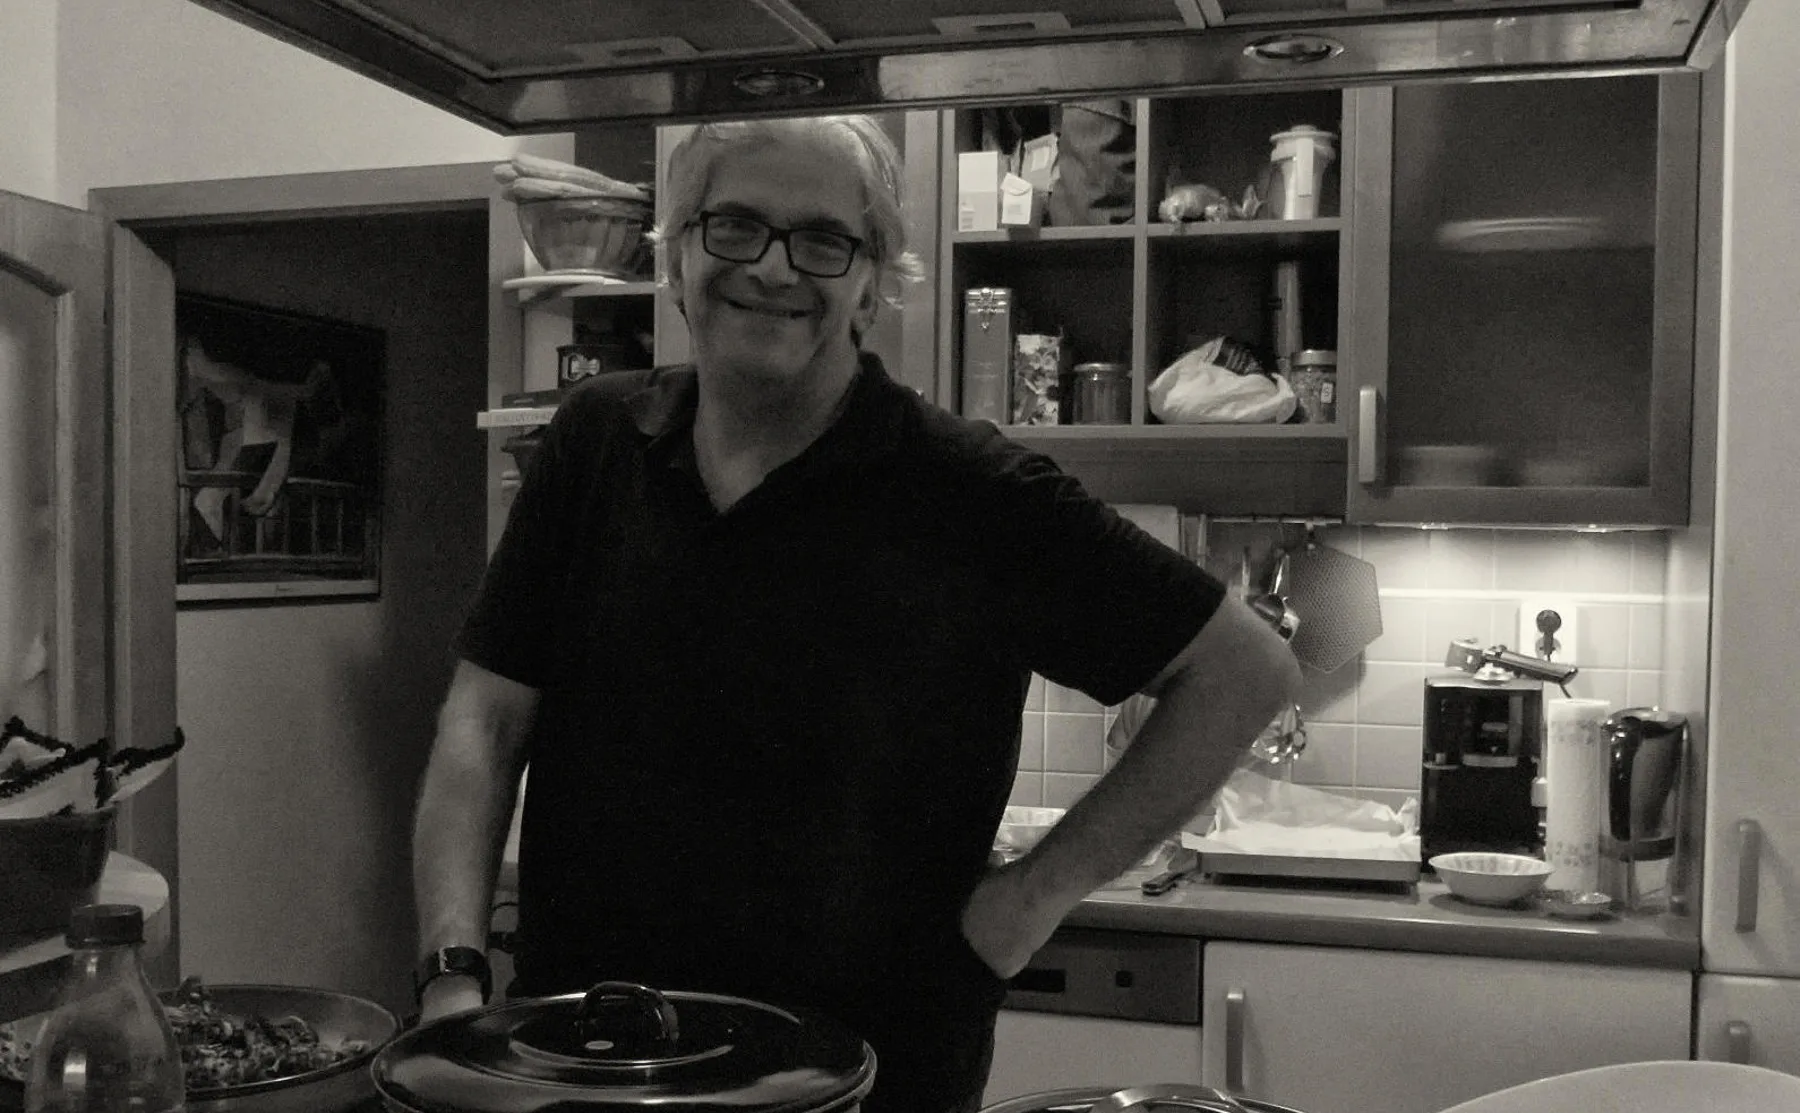 Cooking Lessons with an Italian Chef from Apulia - 610273